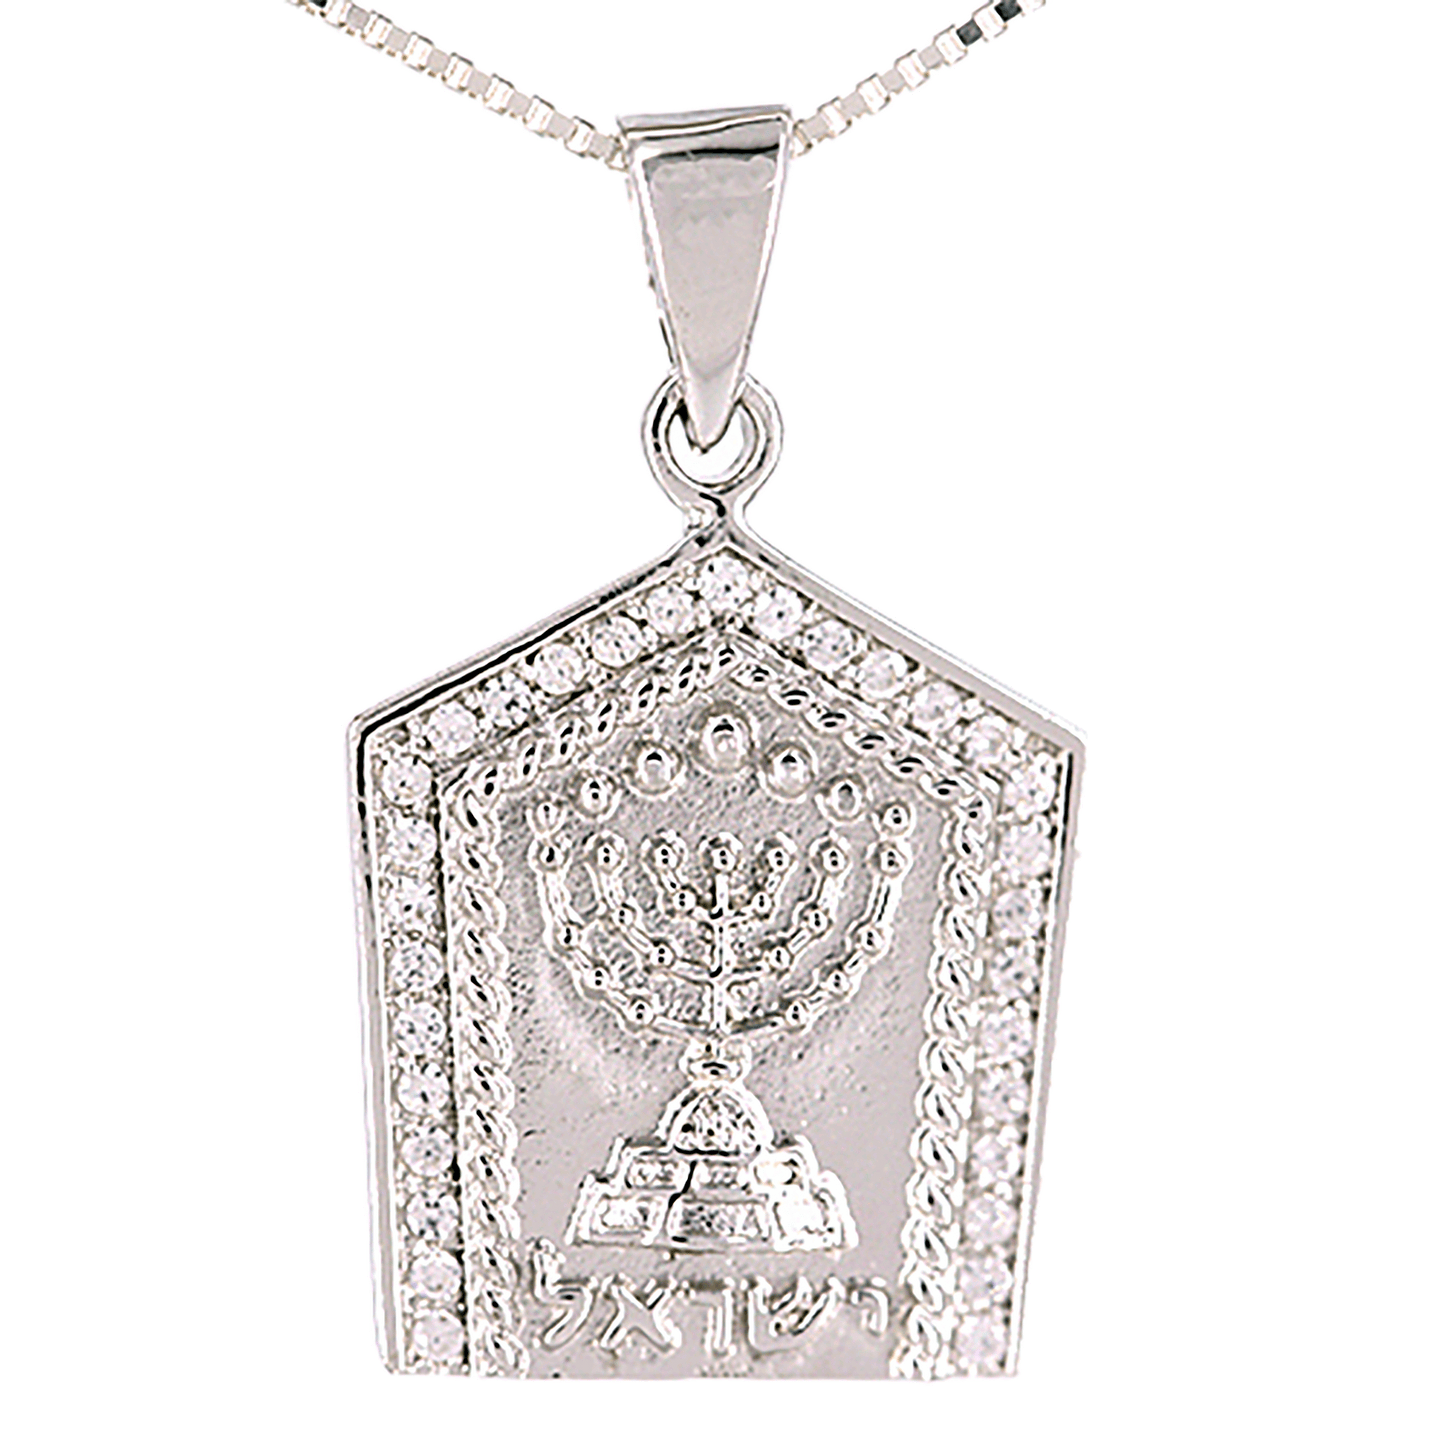 Menorah with Crystals Necklace